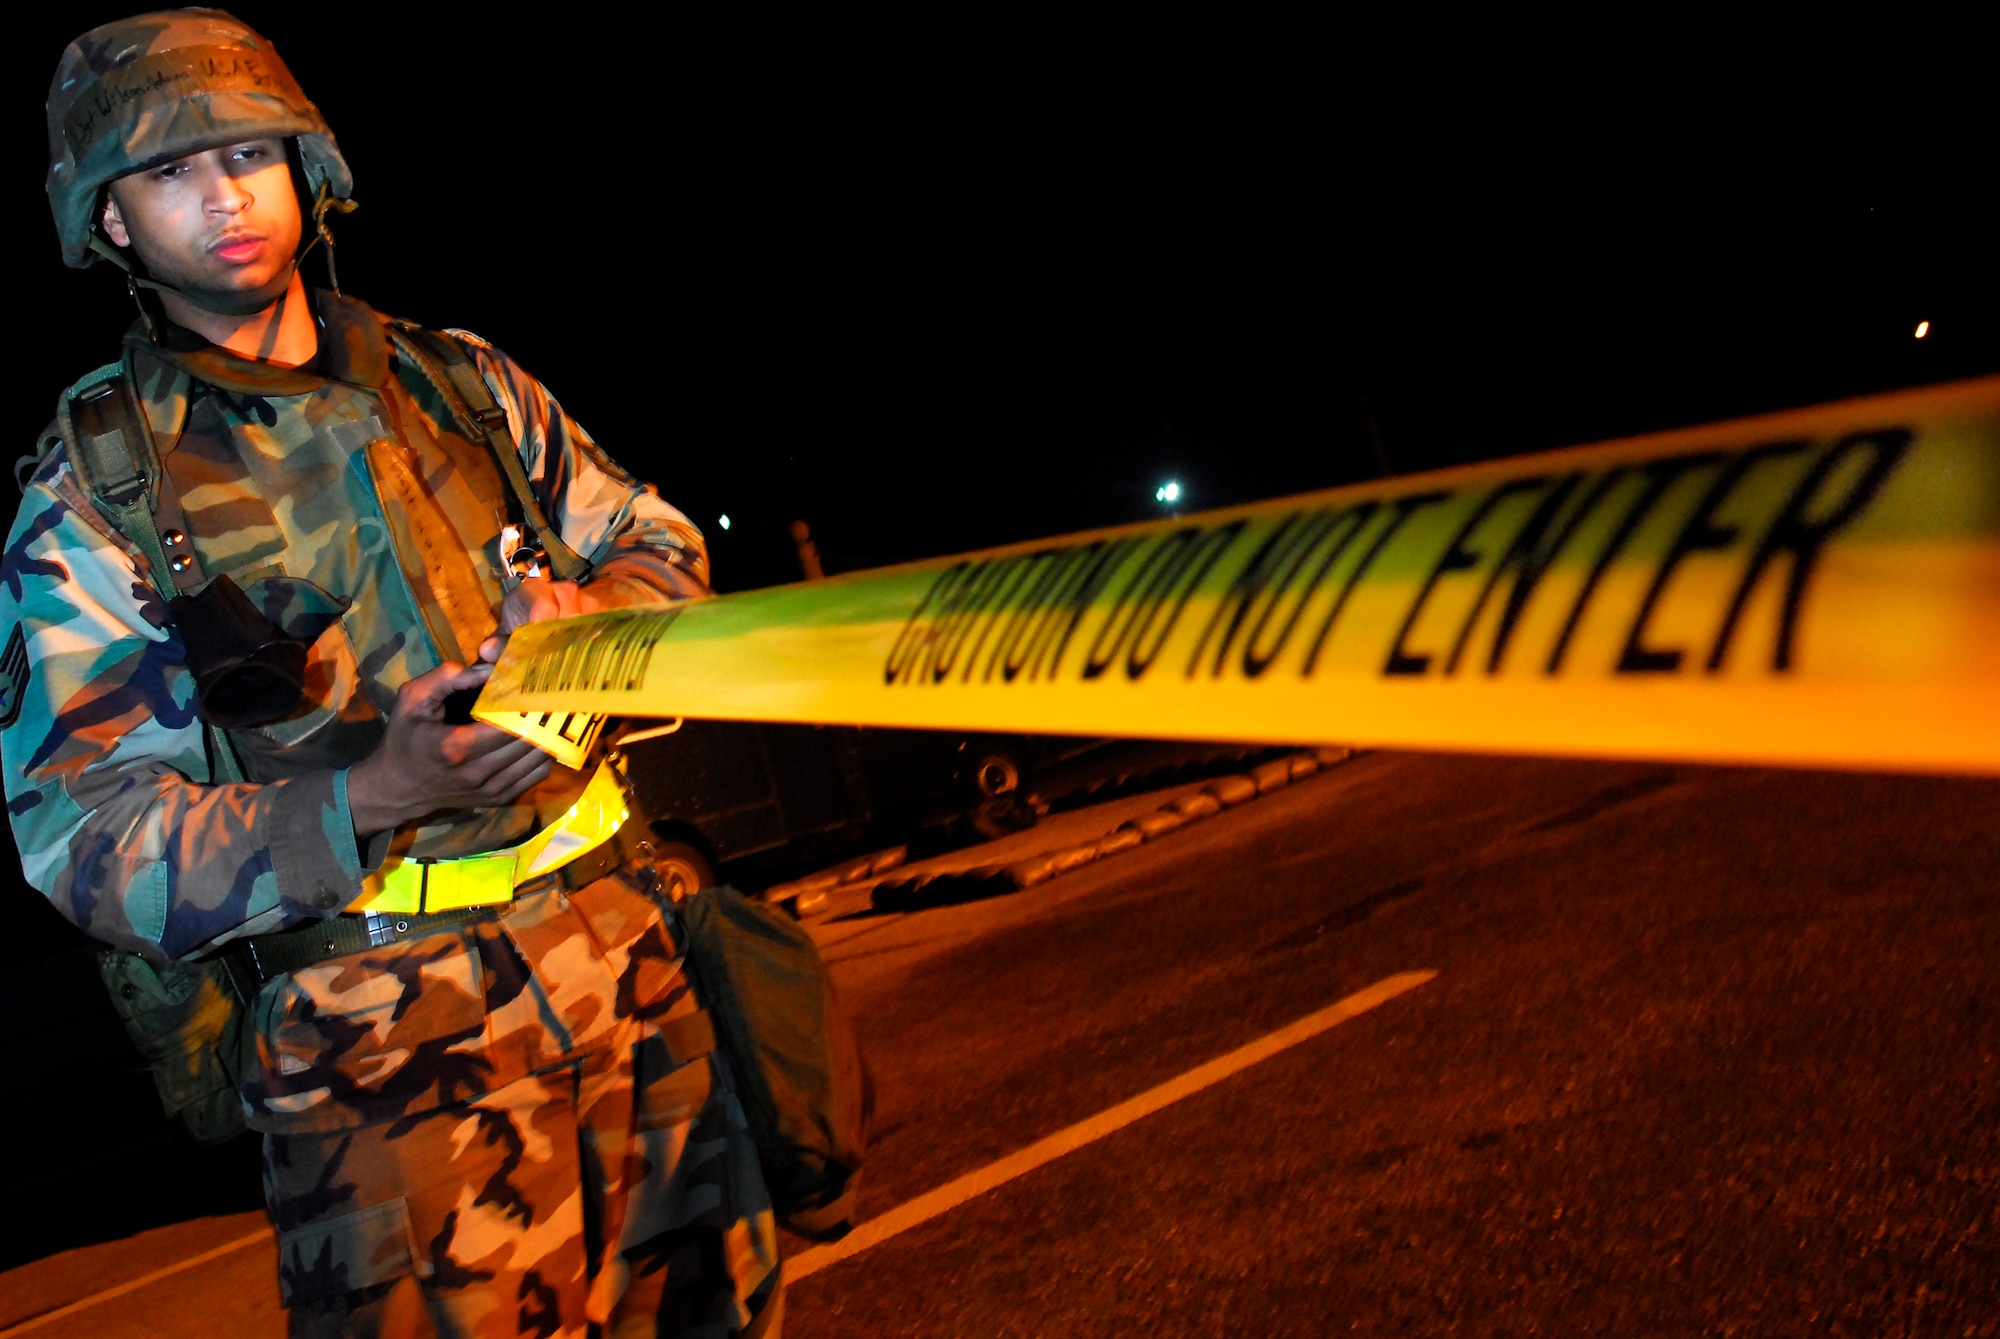 Staff Sgt. Adam Wilson, 18th Logistics Readiness Squadron, sets up a cordon after sweep team found an improvised explosive device located by a sweep team during the 2008 Pacific Air Forces Operational Readiness Inspection at Kadena Air Base, Japan, March 12, 2008. PACAF conducted the inspection from March 9 to 15 to validate mission readiness of the 18th Wing. (U.S. Air Force photo/Staff Sgt. Joshua J. Garcia)